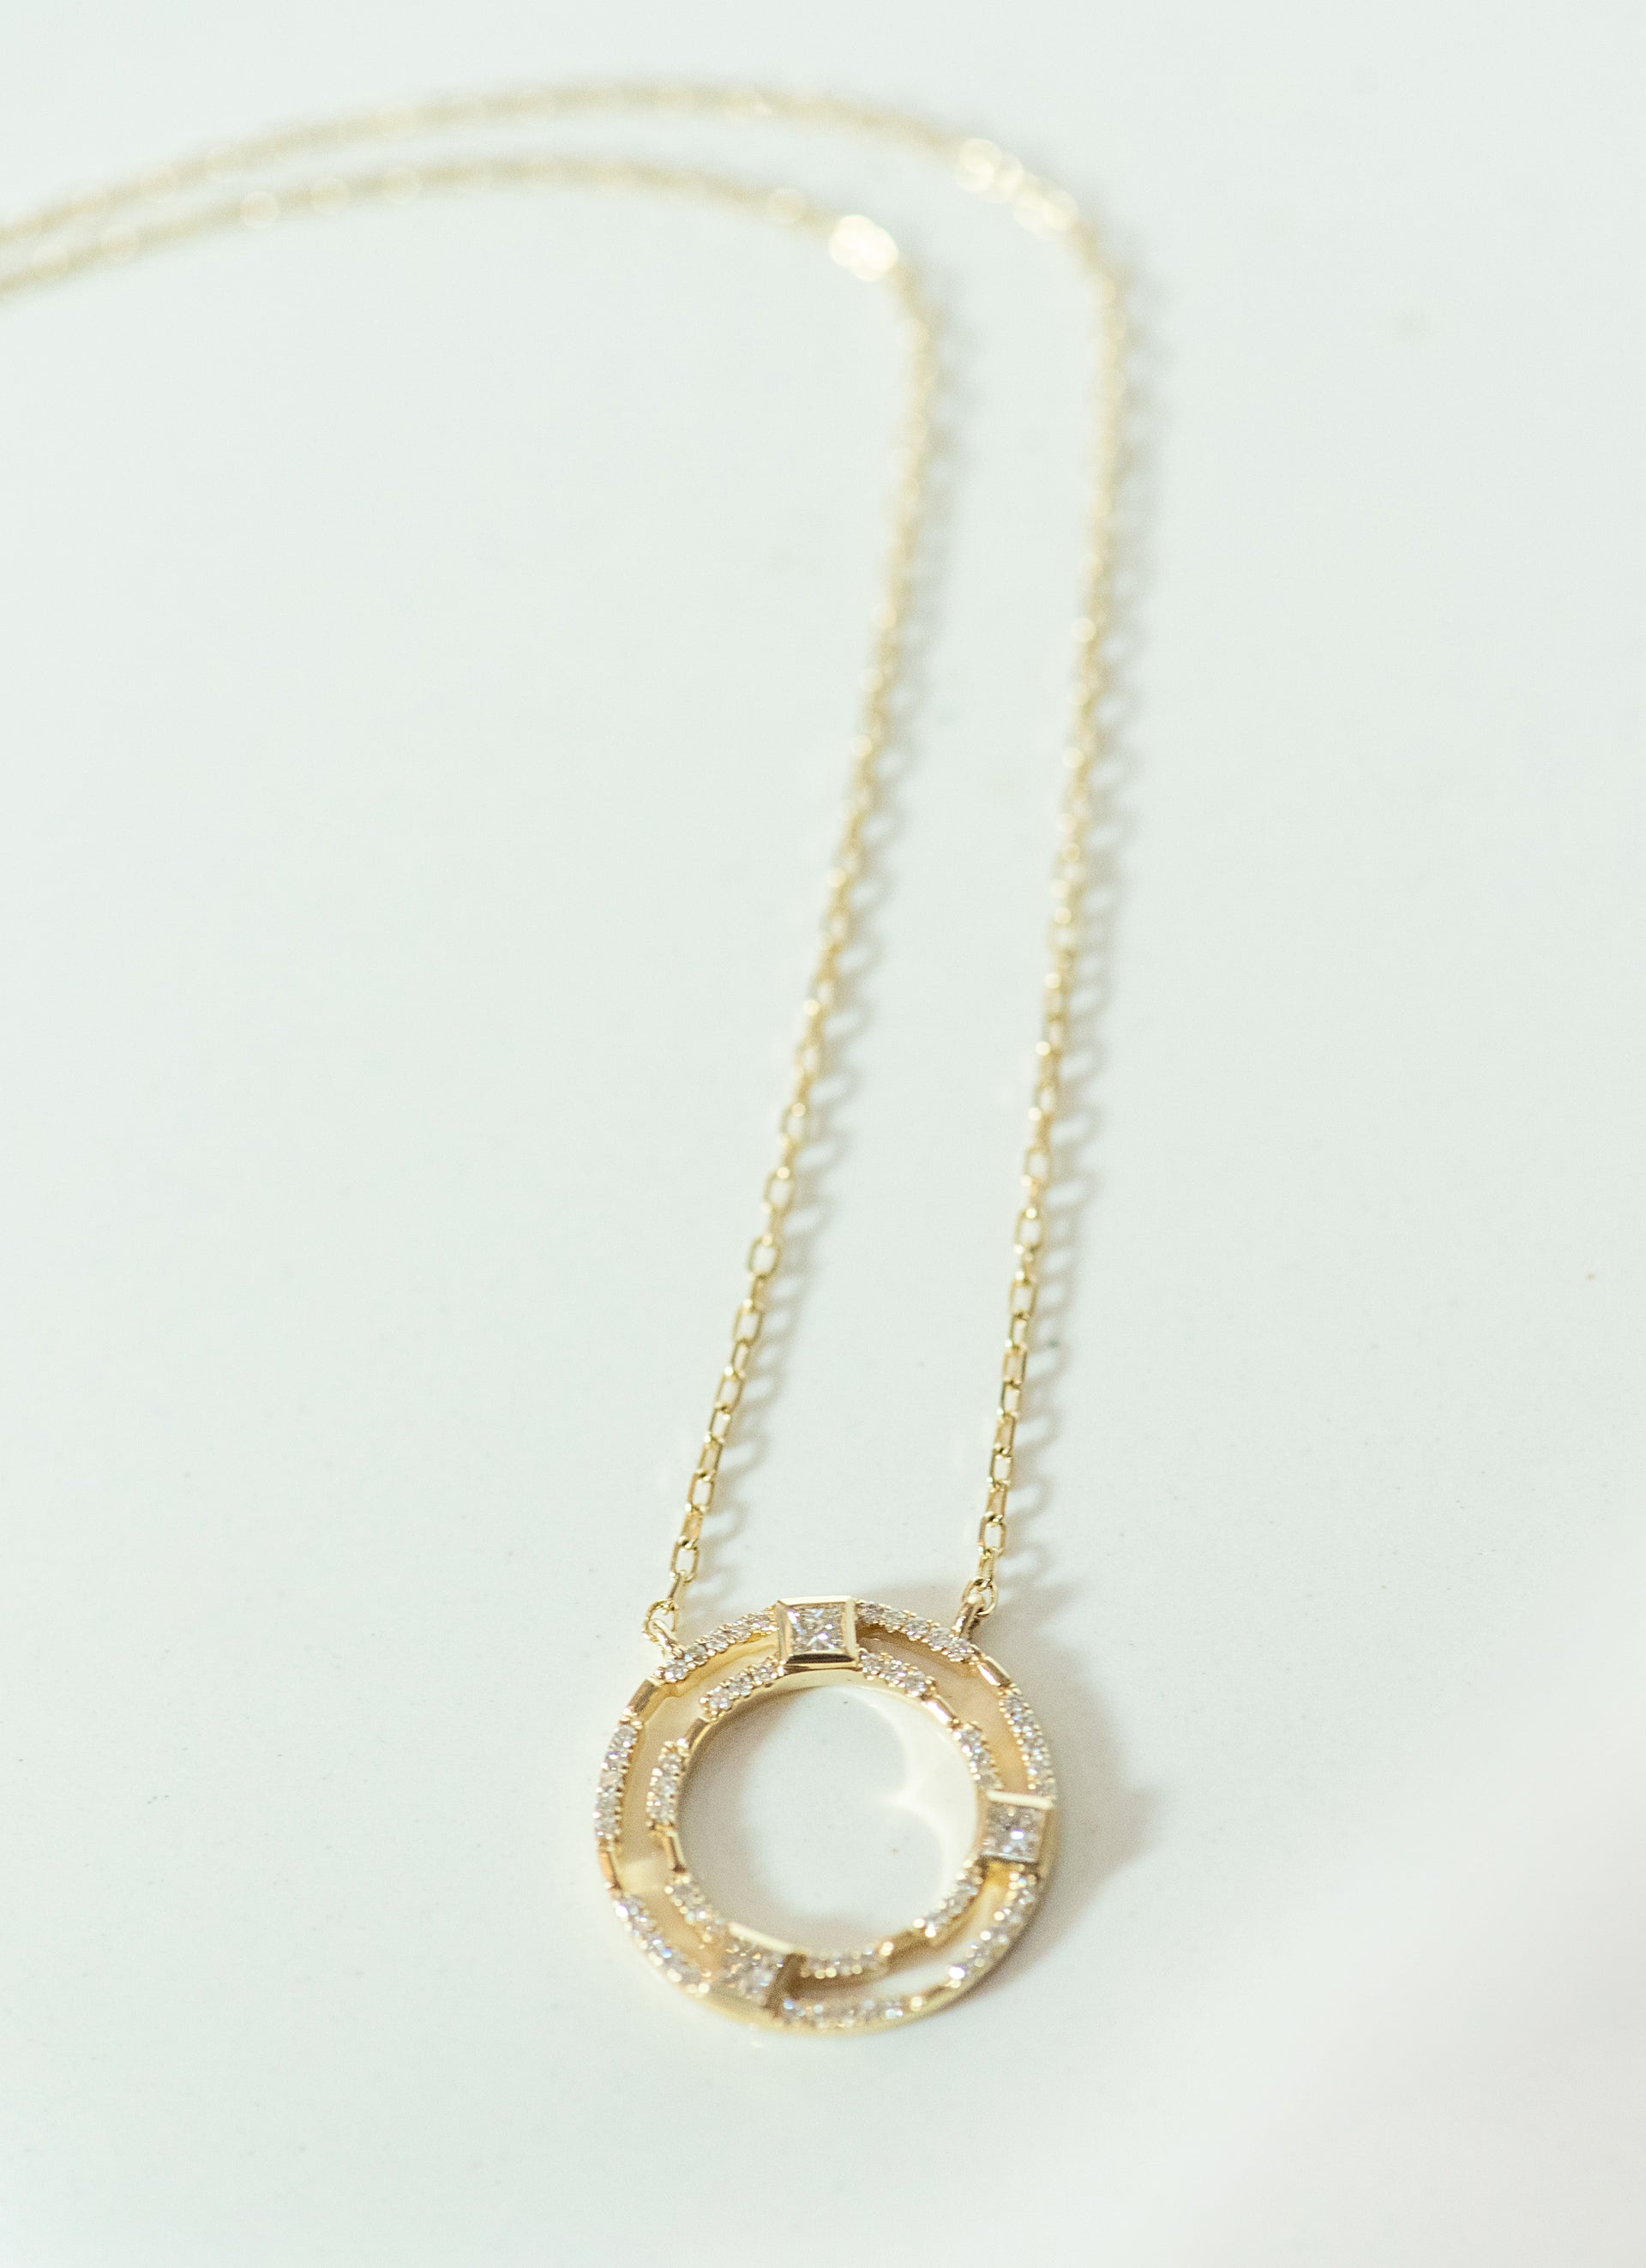 "Circle of Love" Necklace